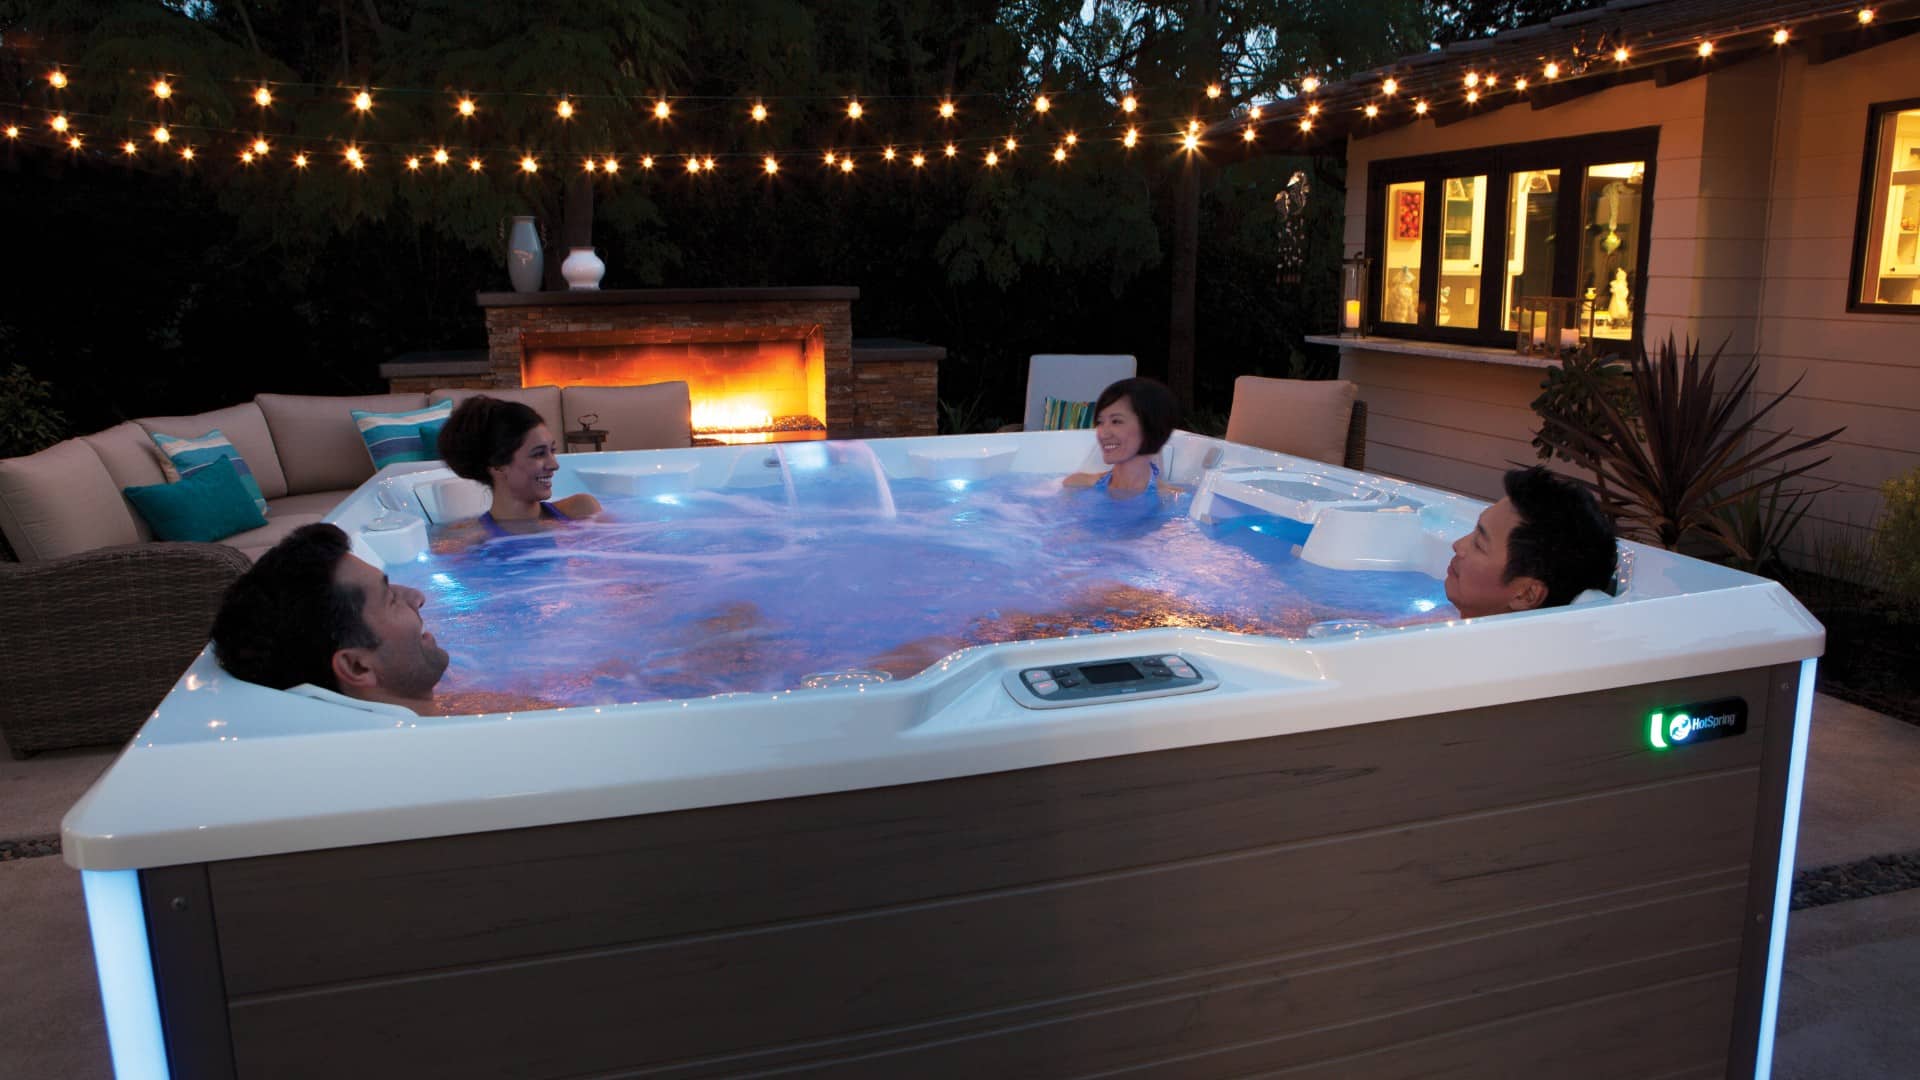 Hot tubs are not just for the rich and famous anymore. Live a life of luxury in a HotSpring hot tub, surrounded by elegant lights.